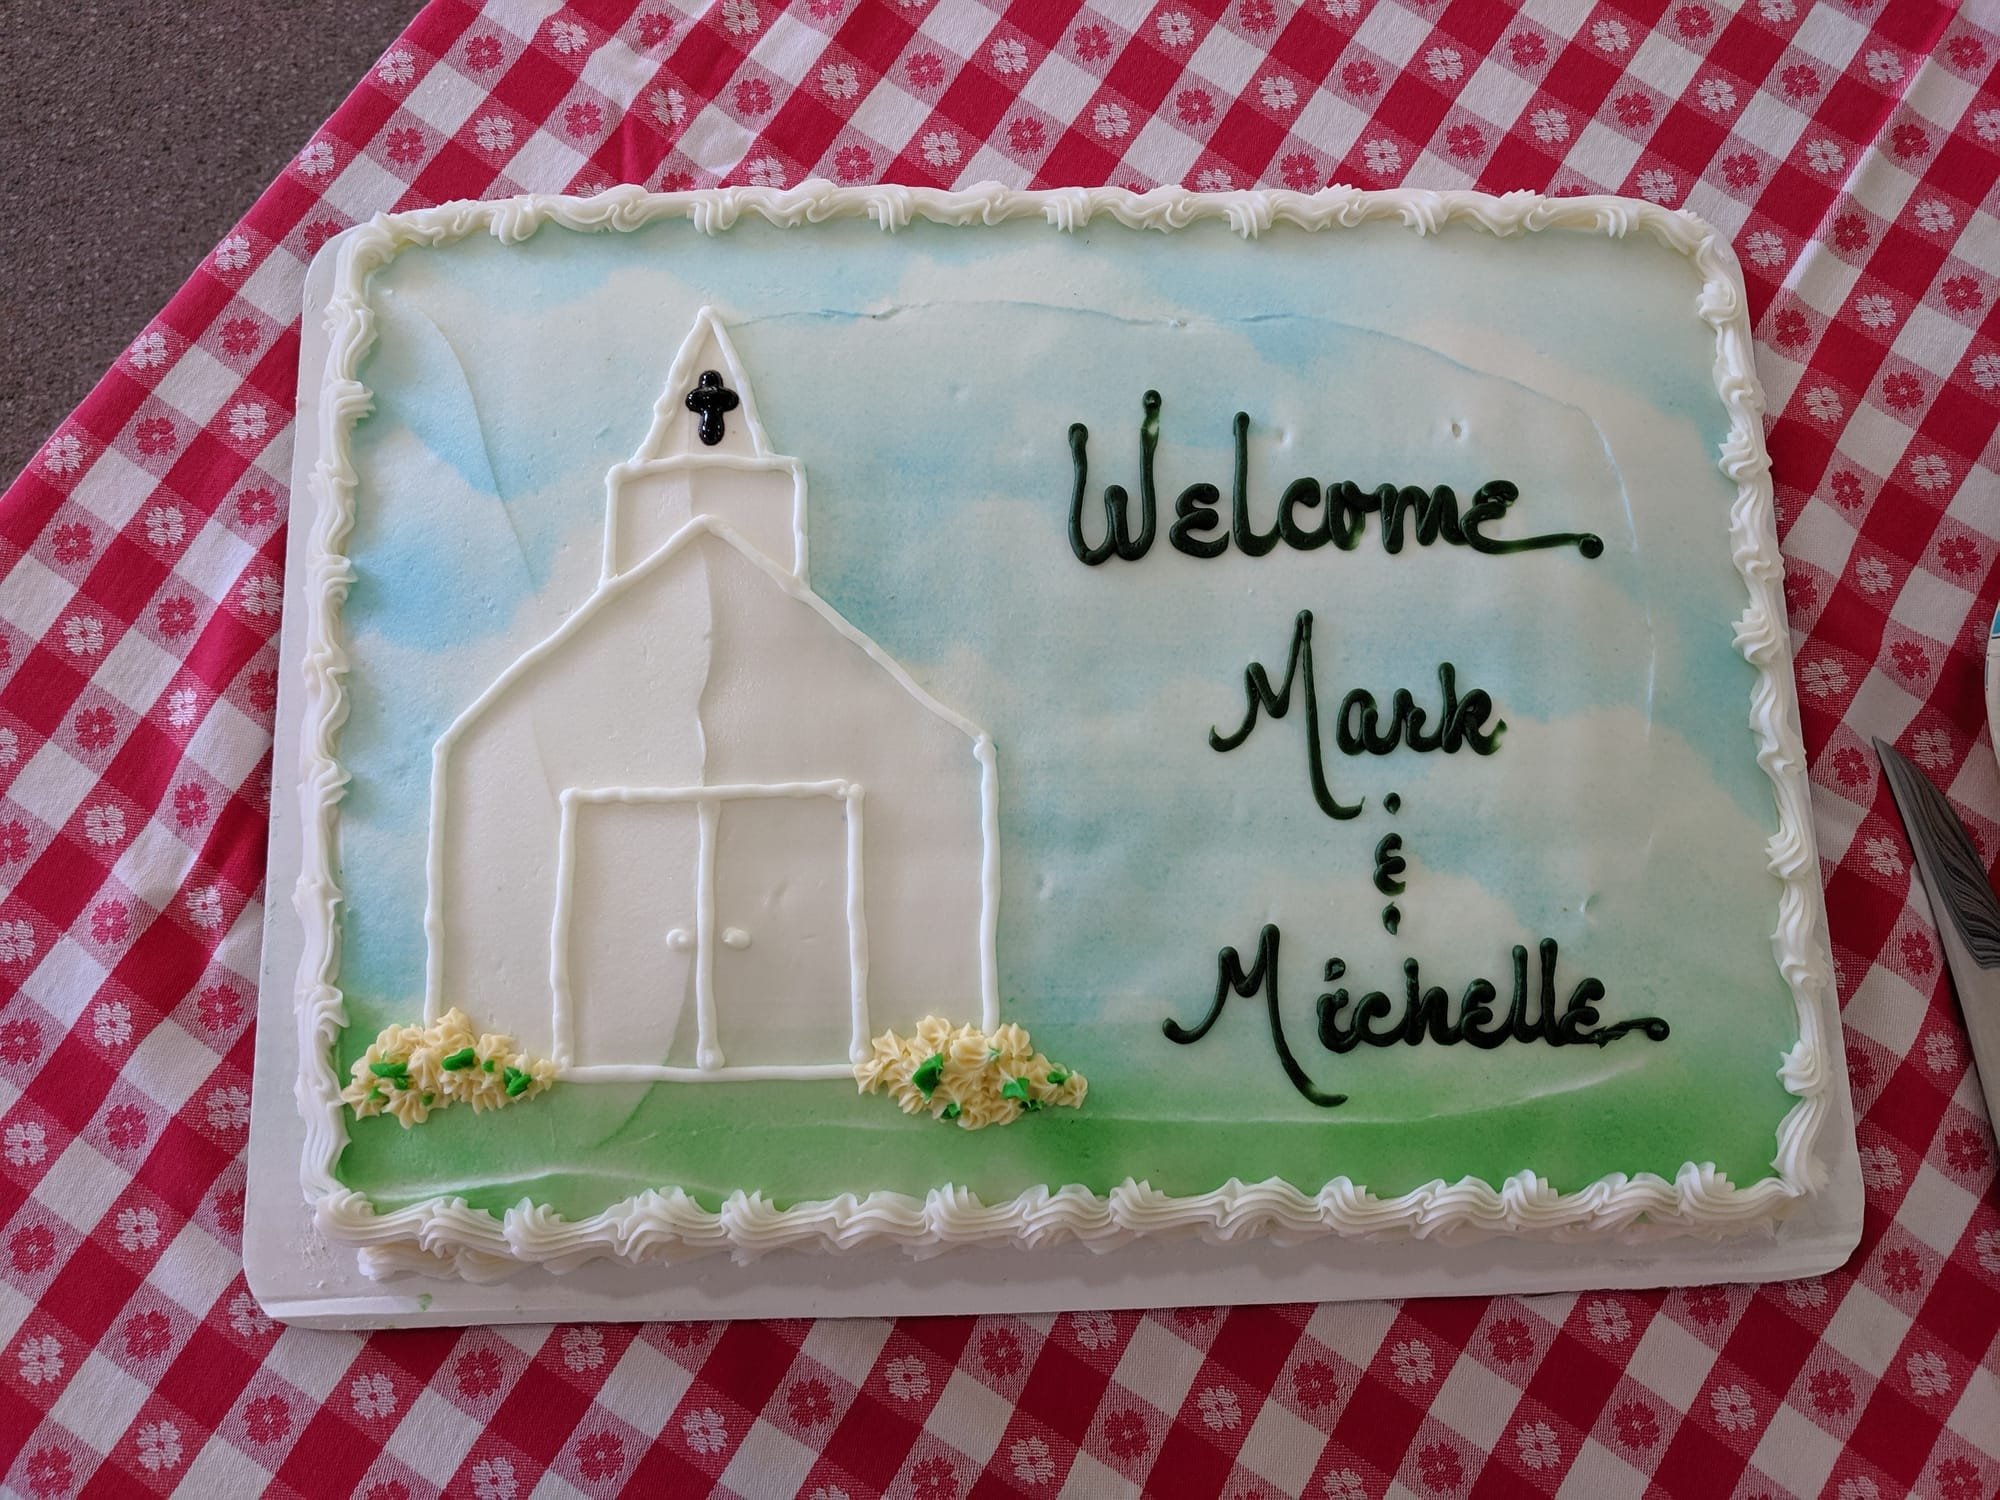 "Welcome, Mark and Michelle!"